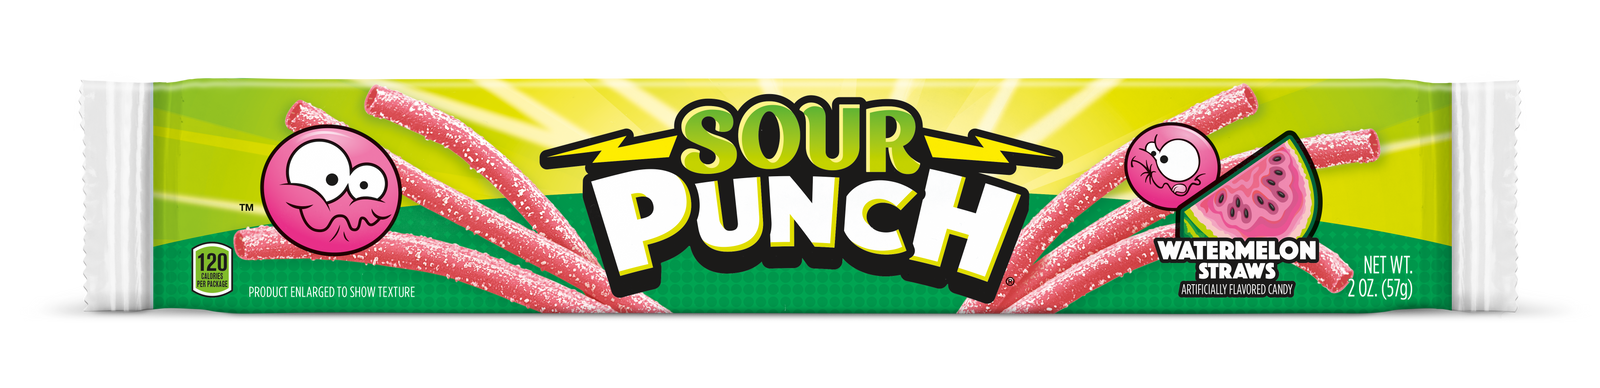 Sour Punch Watermelon Straws - 24 ct